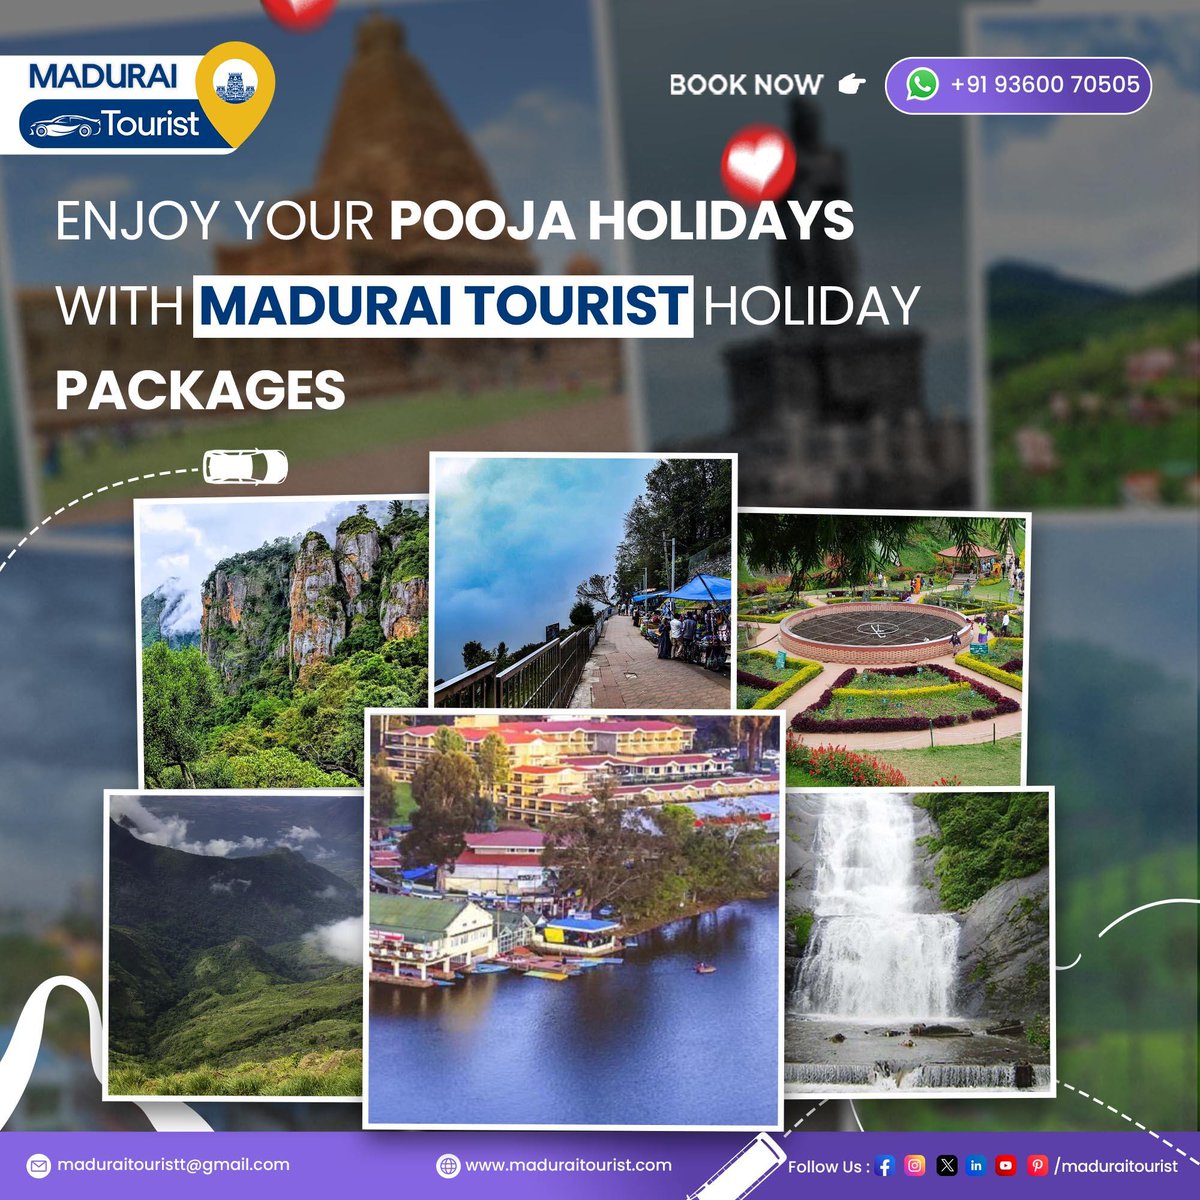 🌆 Your Pooja Holidays just got a whole lot more exciting! ✨ 🏛 Book now and let's make your Pooja break unforgettable! 👉 maduraitourist.com #MaduraiMagic #PoojaHolidays #WanderlustMode #TravelWithUs #MaduraiTours #Letsconnect #TravelGoals #WanderlustAdventures